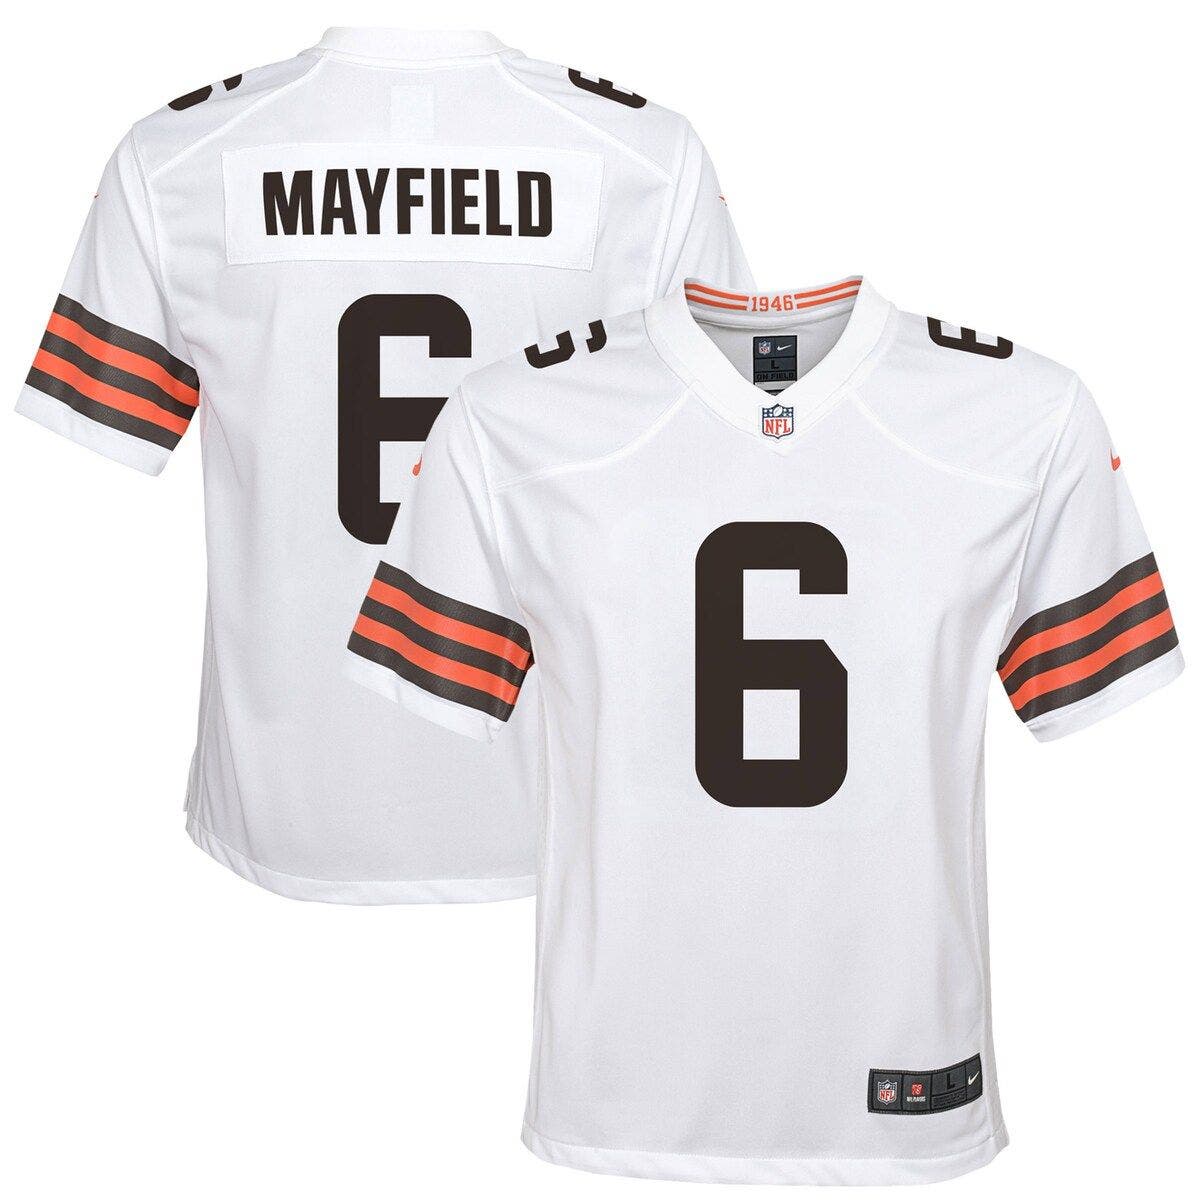 UPC 194674475872 product image for Youth Nike Baker Mayfield White Cleveland Browns Game Jersey at Nordstrom | upcitemdb.com